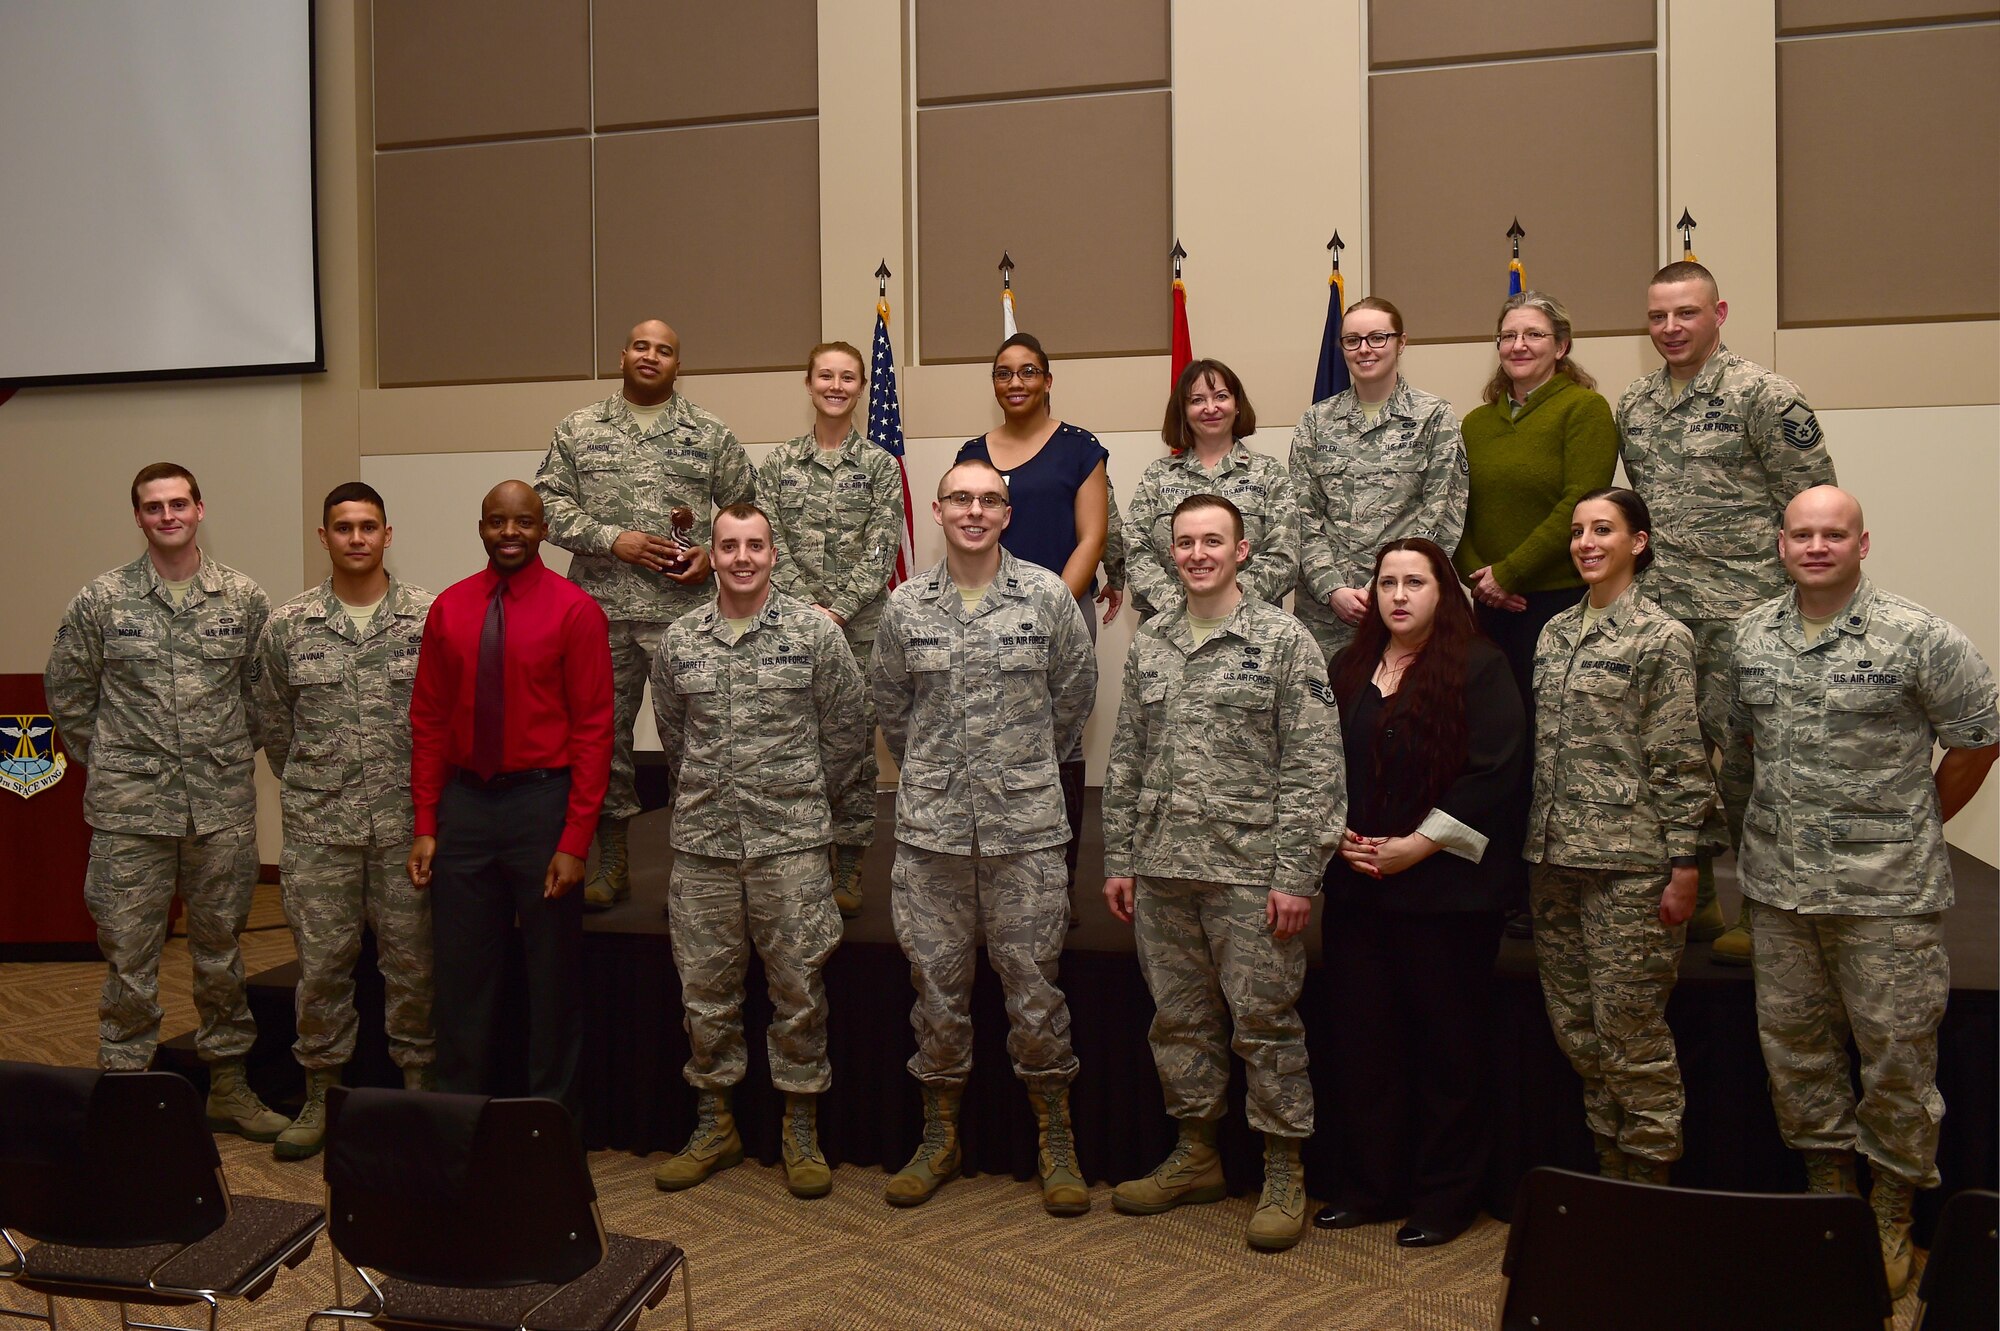 The 460th Space Wing quarterly award winners stand together Jan. 28, 2016, at the Leadership Development Center on Buckley Air Force Base, Colo. The award winners were chosen because of their hard work and dedication in their work centers. (U.S. Air Force photo by Airman 1st Class Gabrielle Spradling/Released)